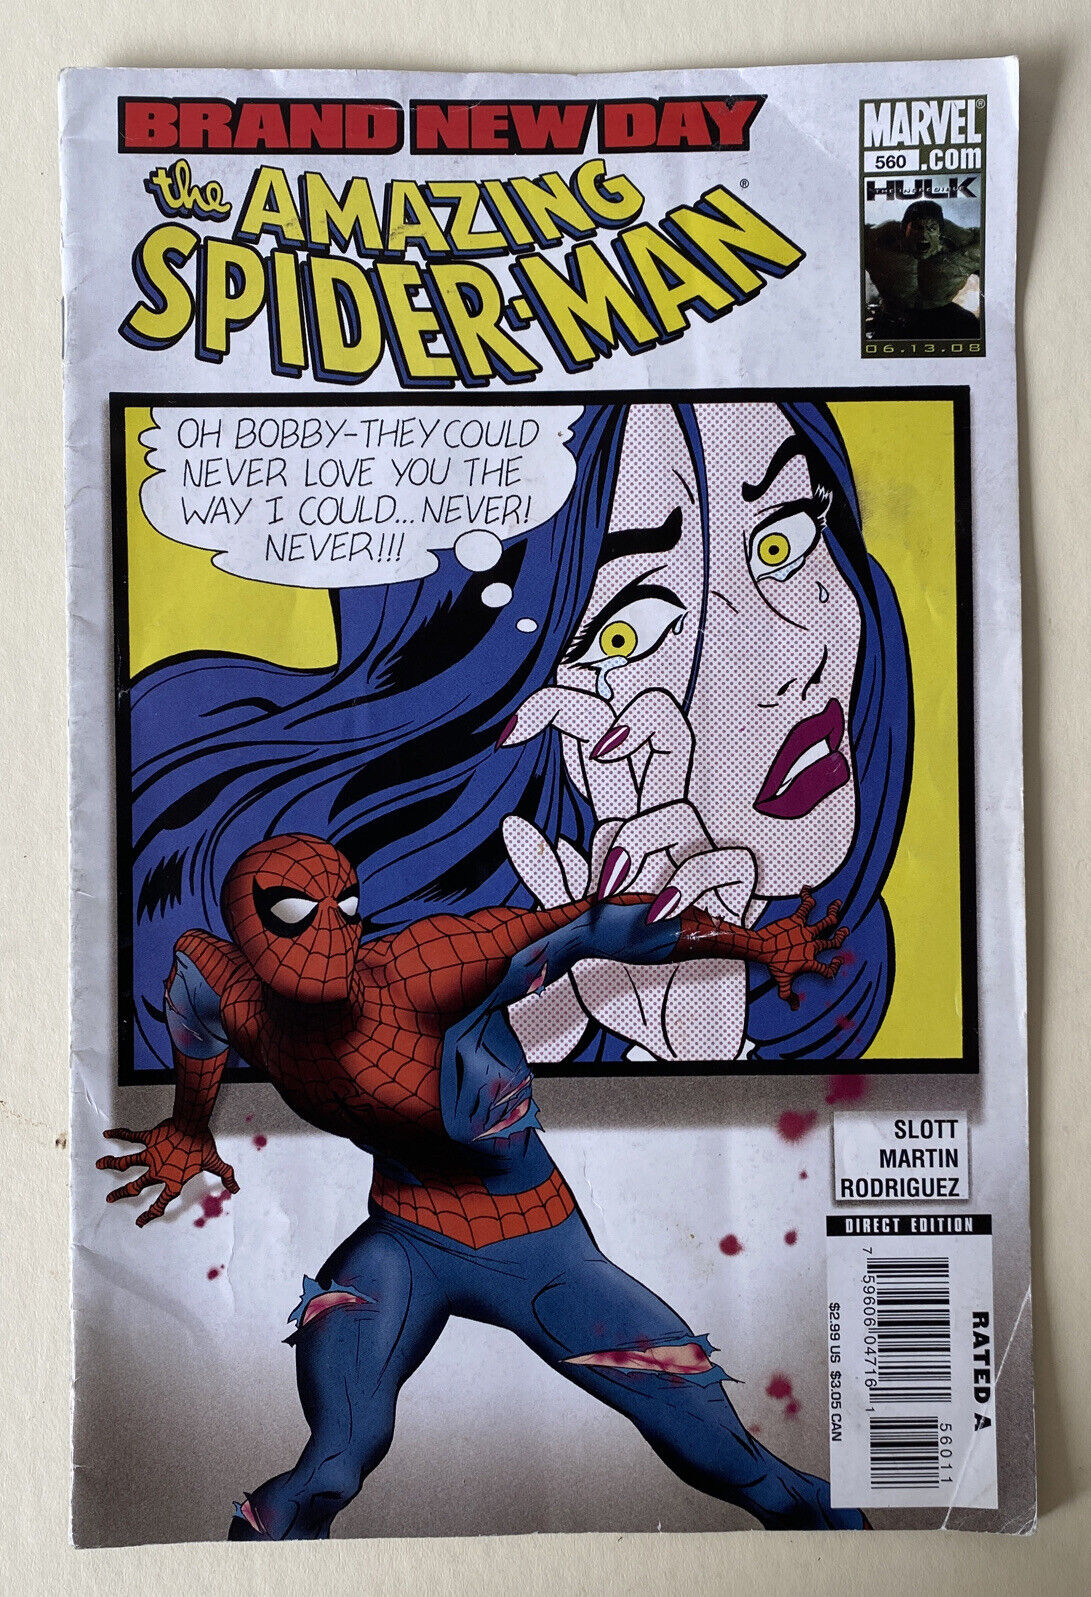 The Amazing Spider-Man #560  BRAND NEW DAY variant art